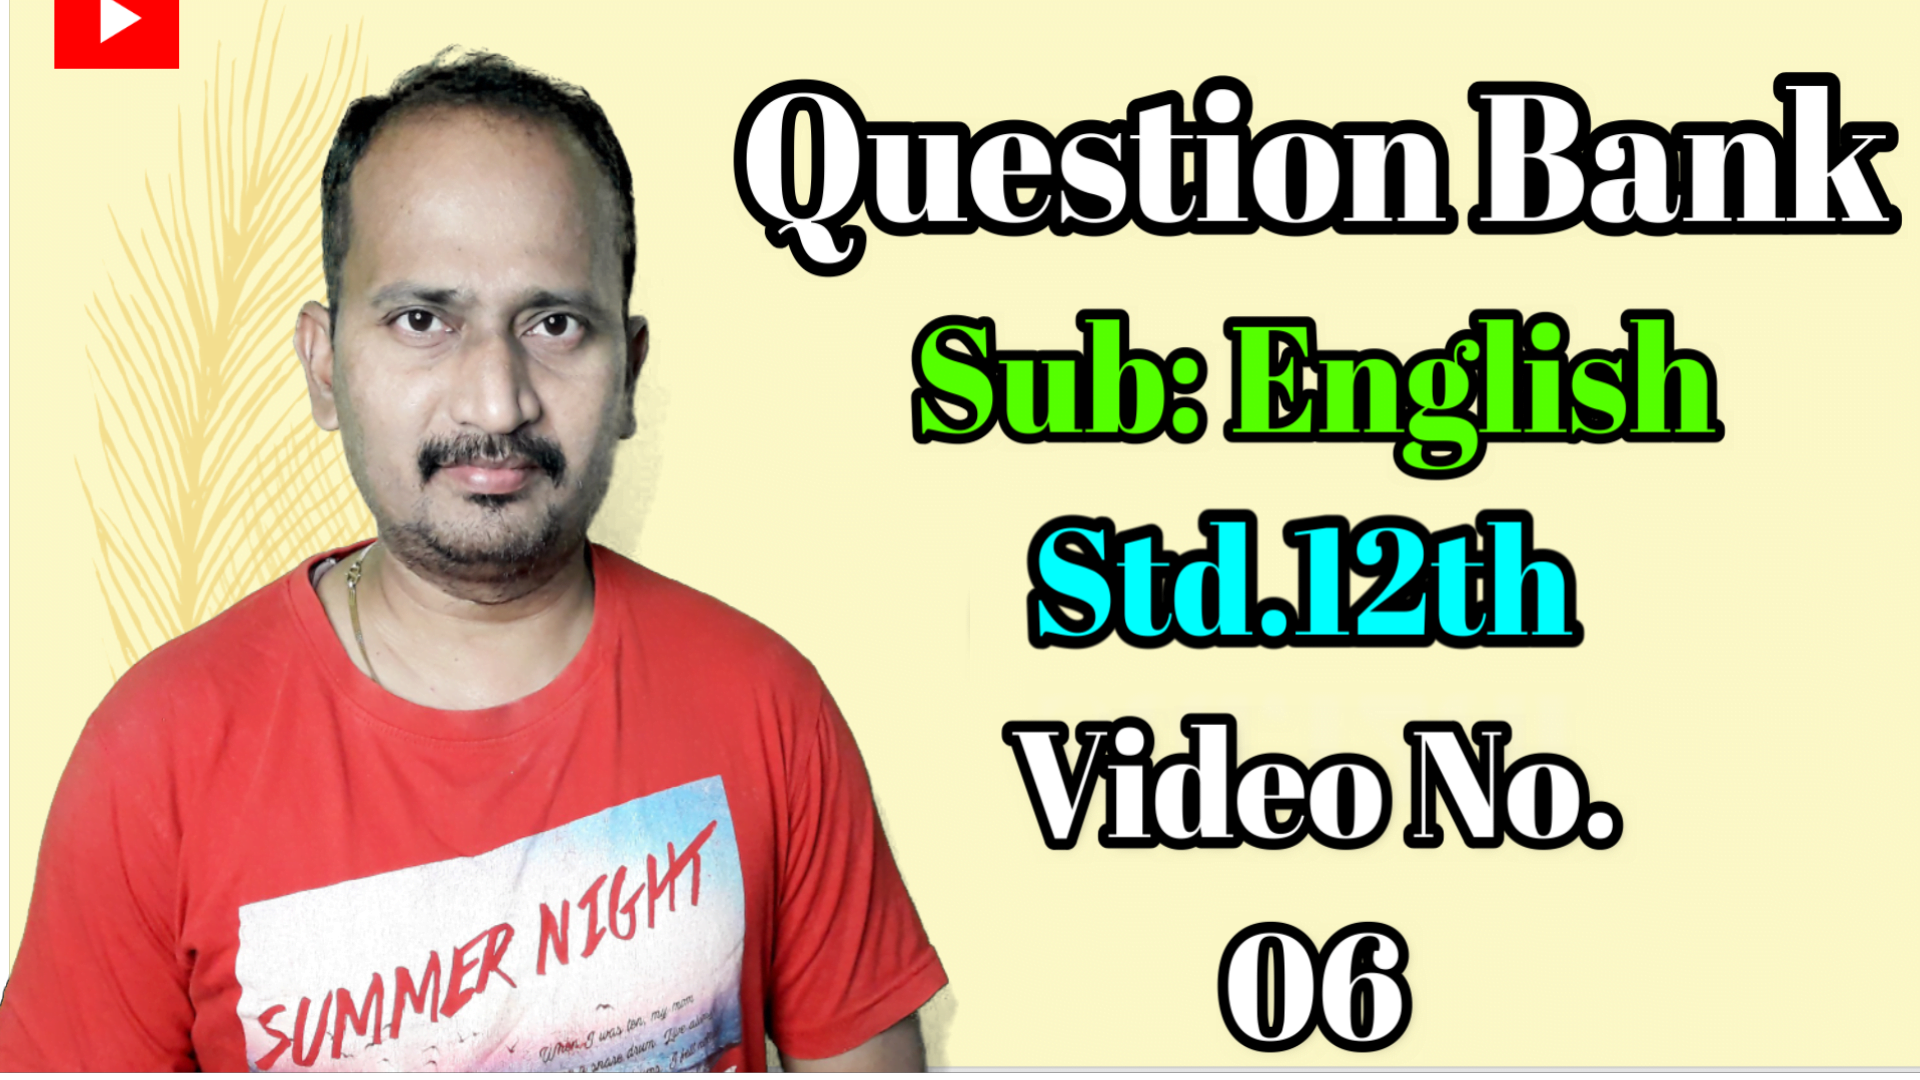 Question Bank Std.12th Video No.06